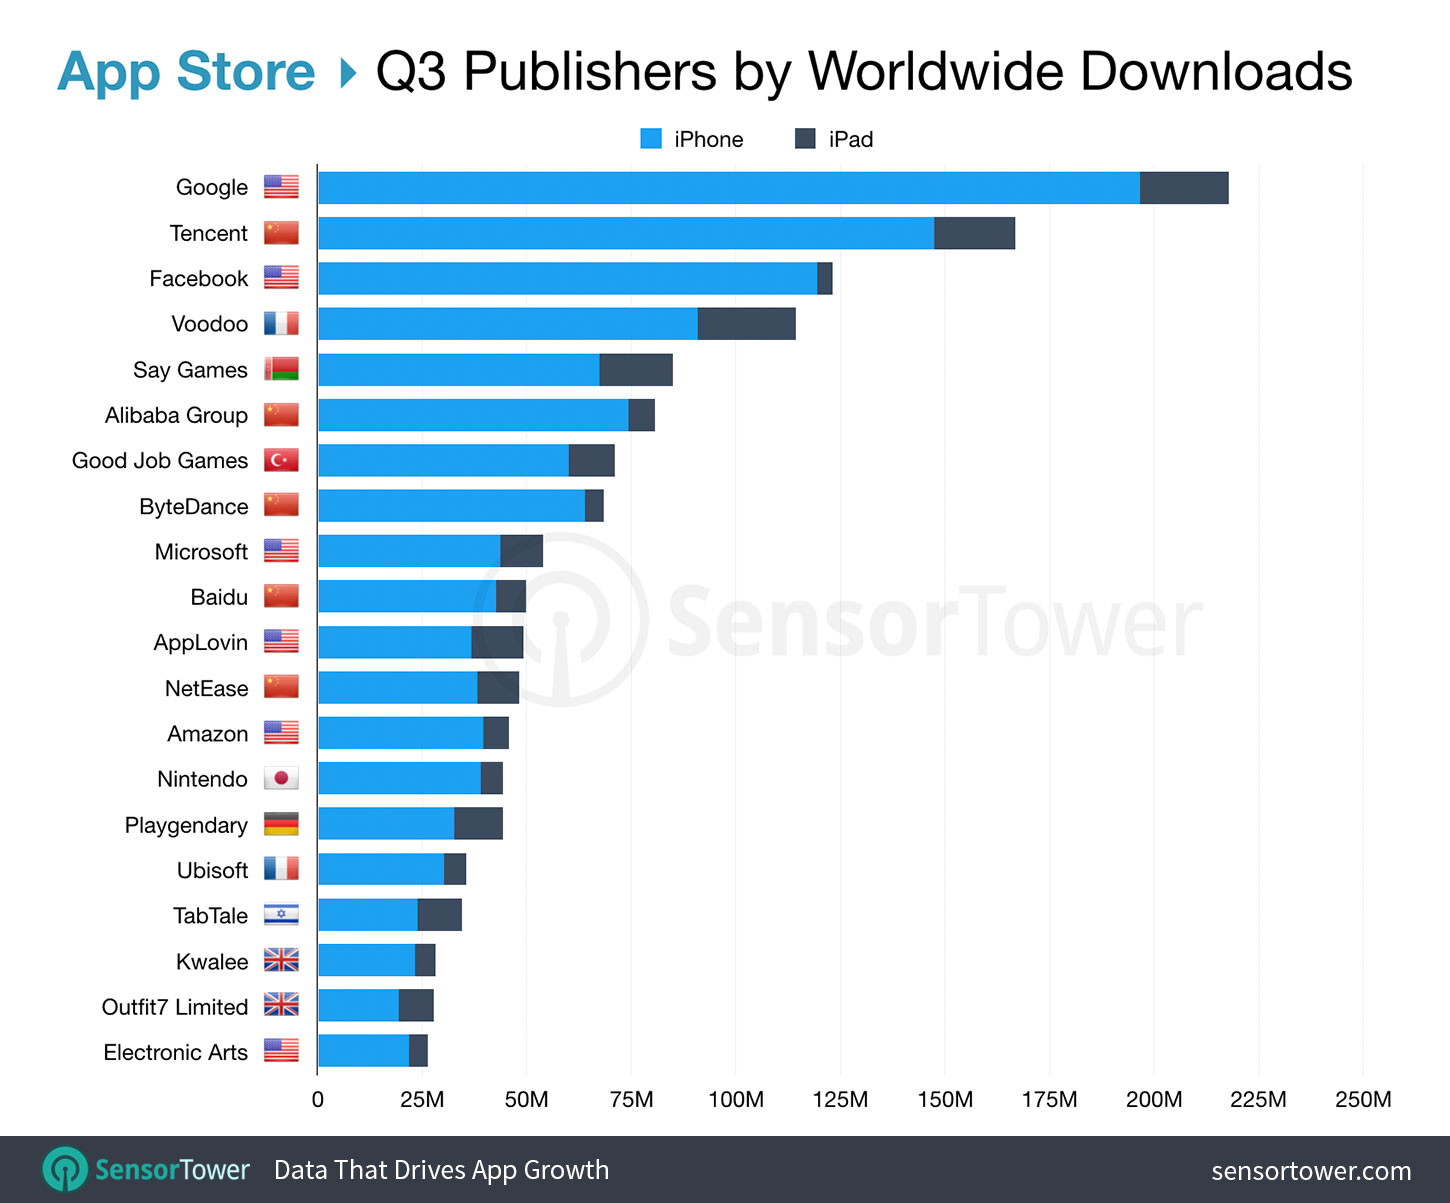 Top Mobile Publishers by App Store Downloads Worldwide for Q3 2019